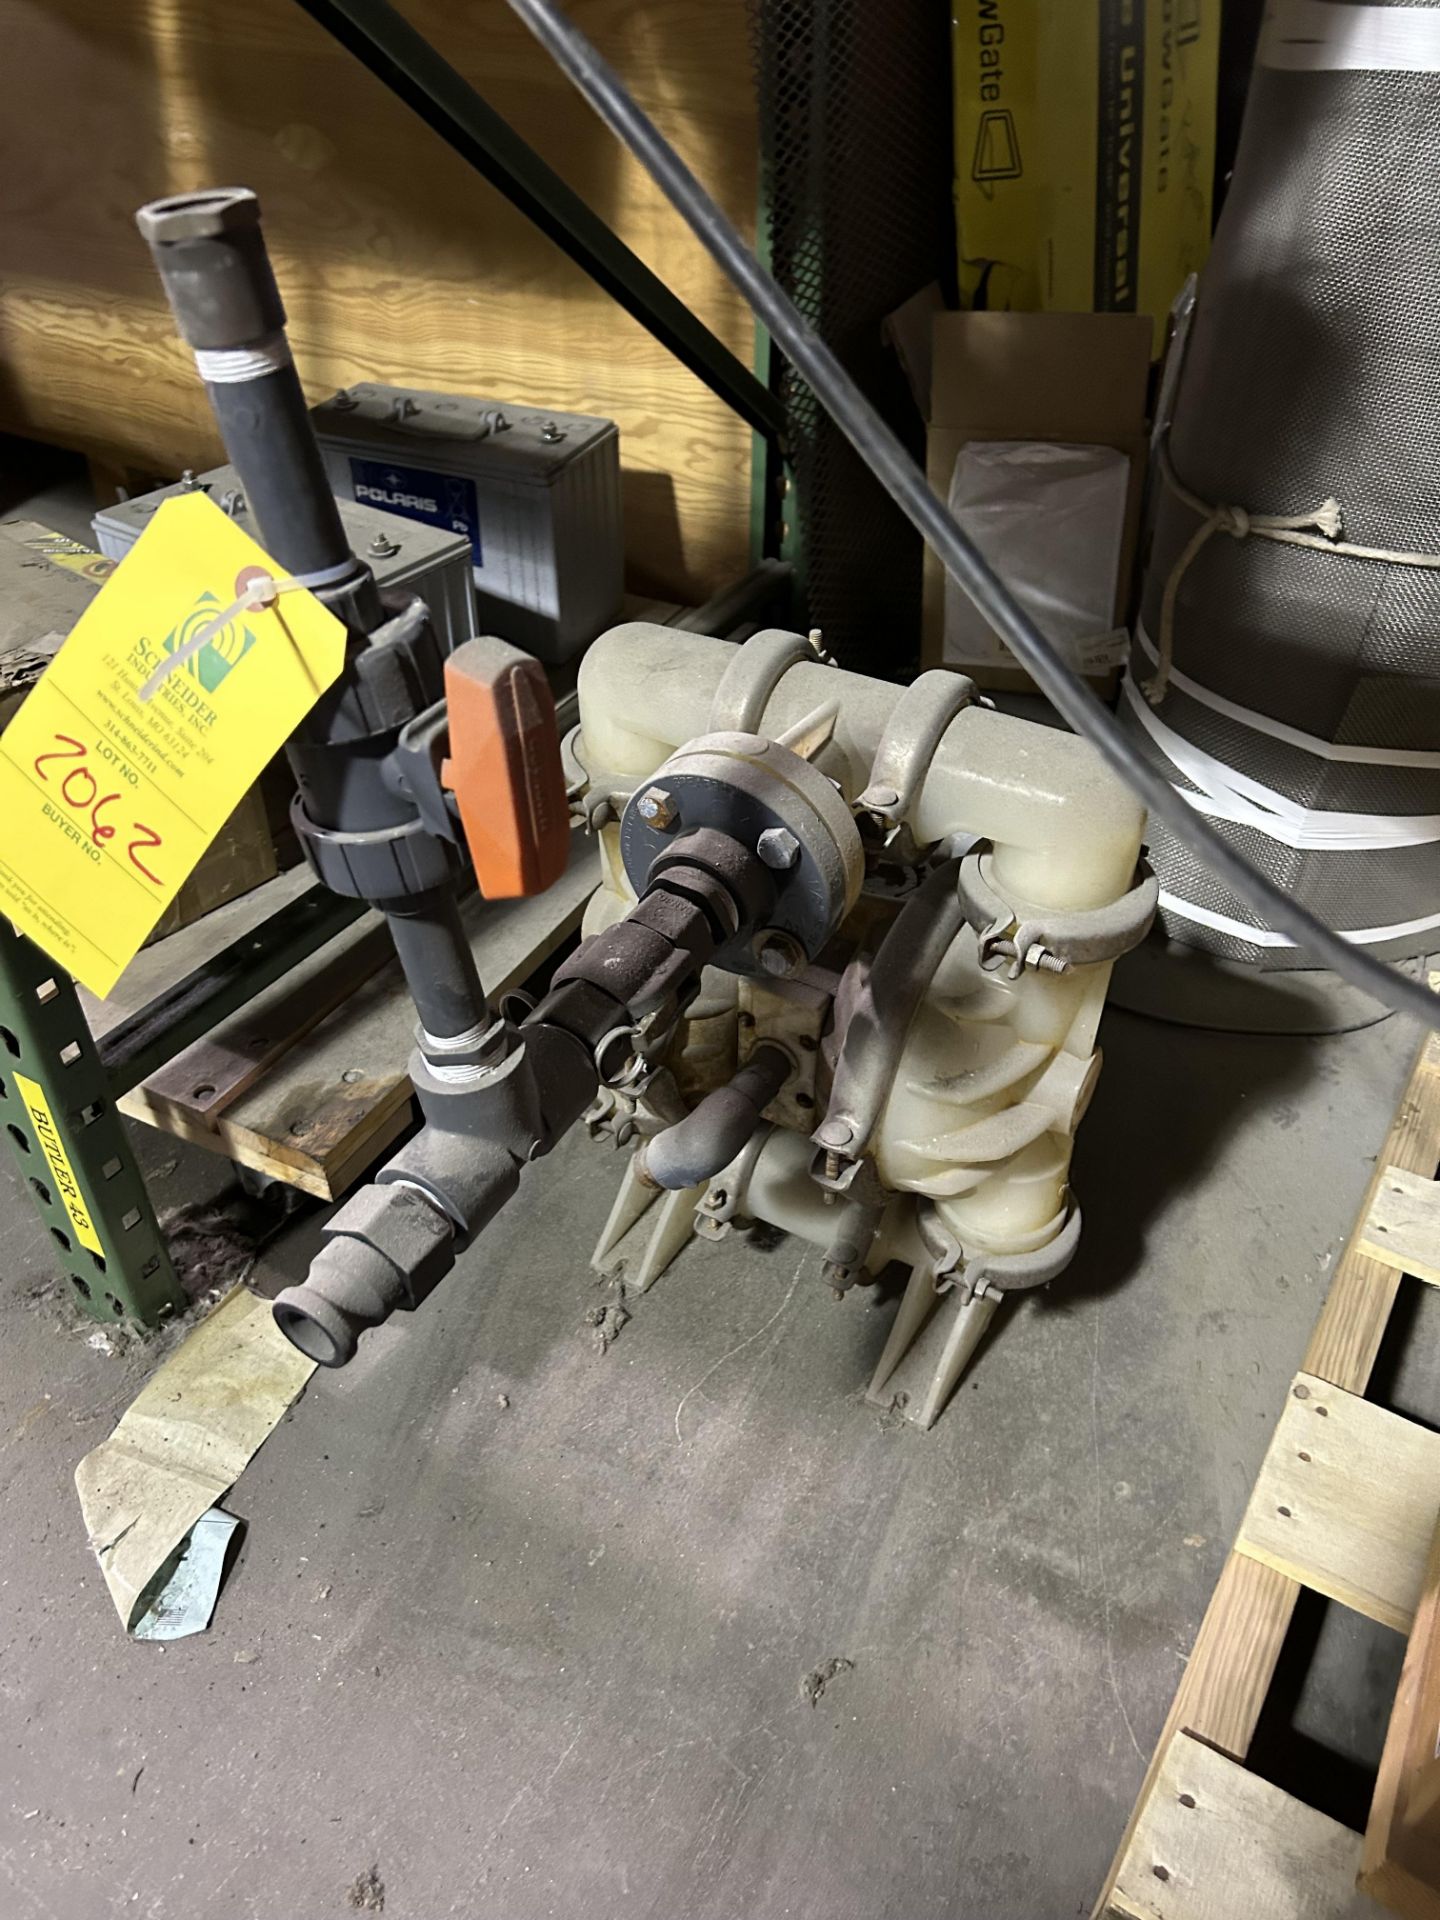 Double Valve Pump, Rigging & Loading Fee: $75 - Image 2 of 4